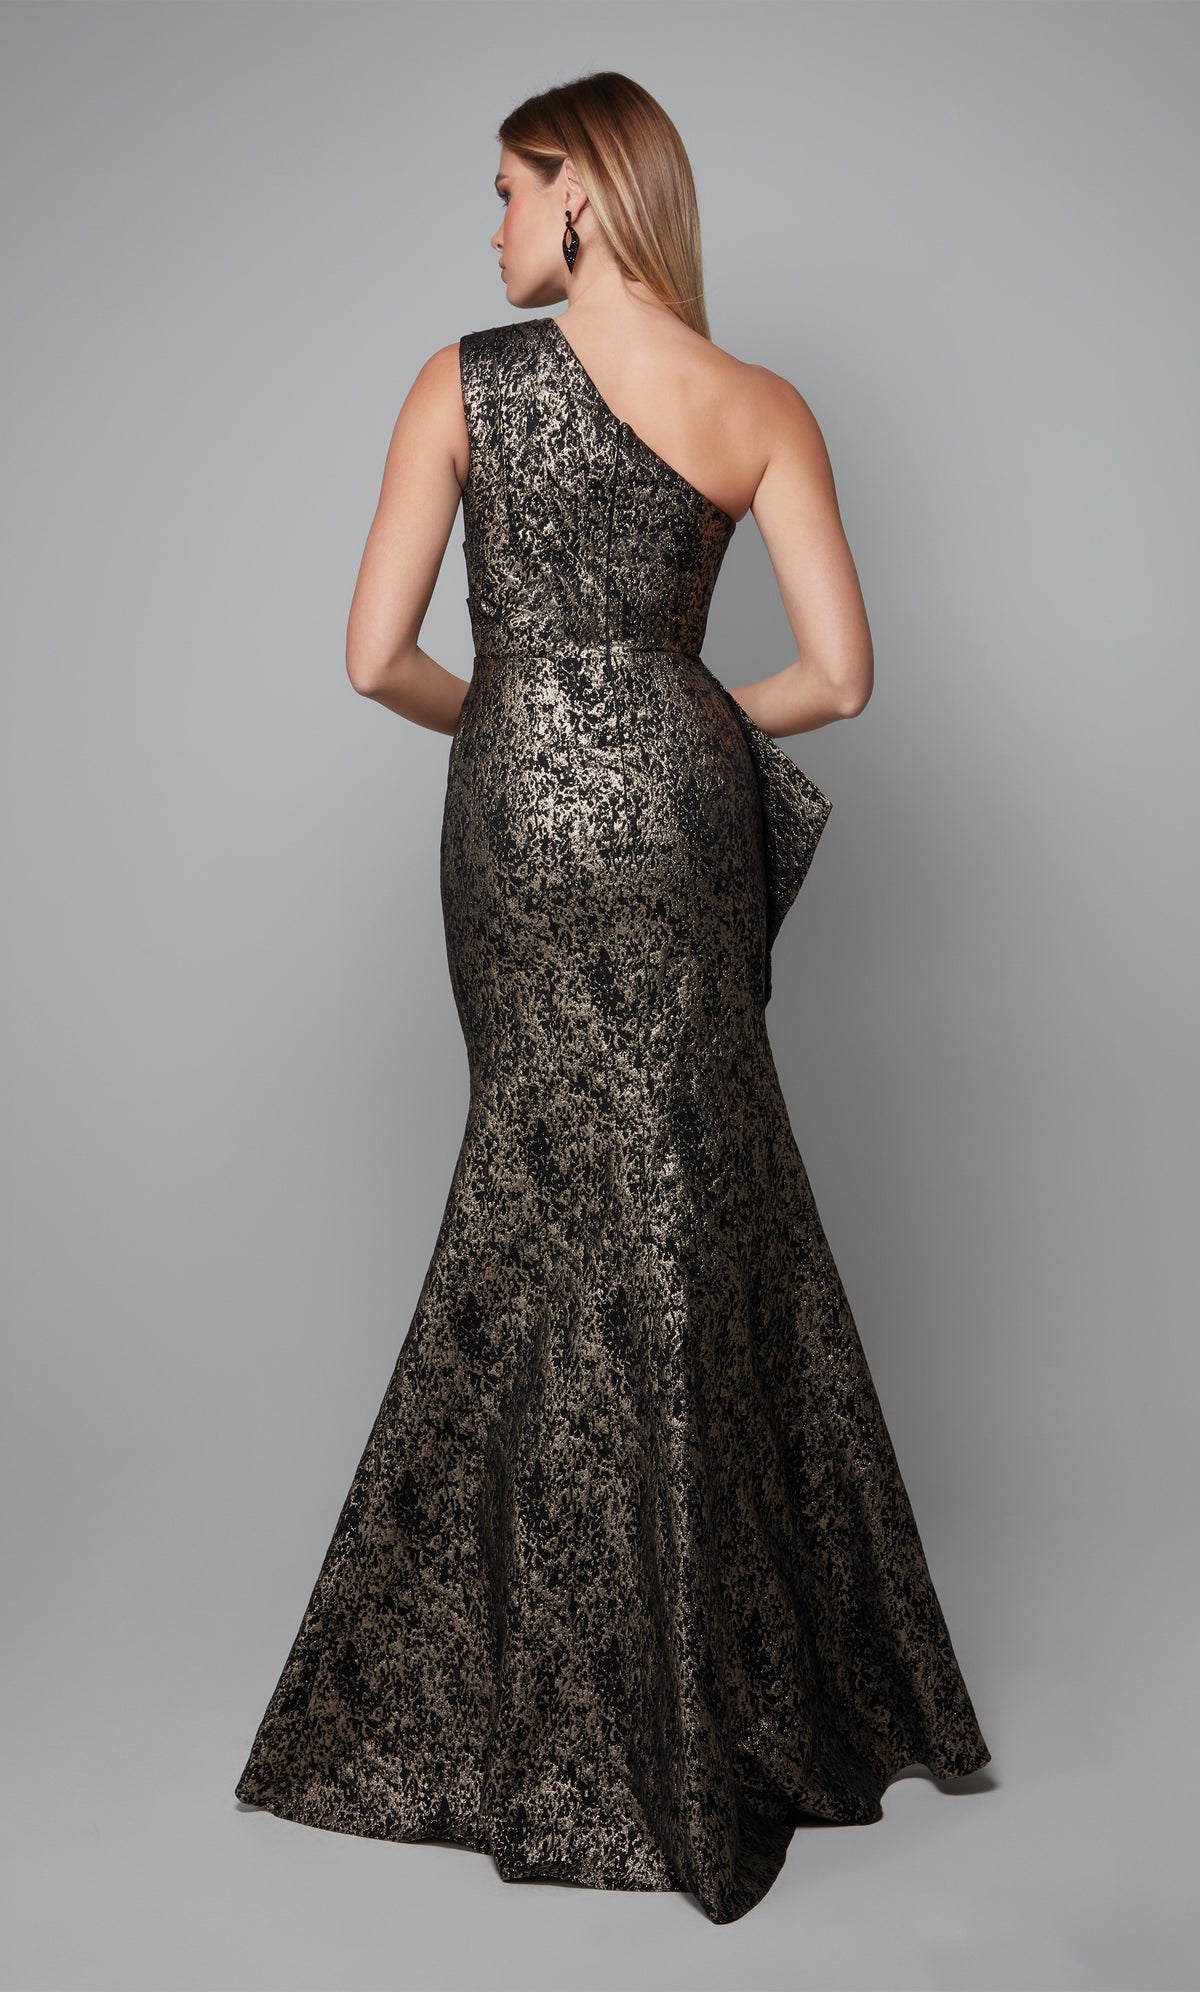 Fit and flare one shoulder jacquard side ruffle gown in black-gold.